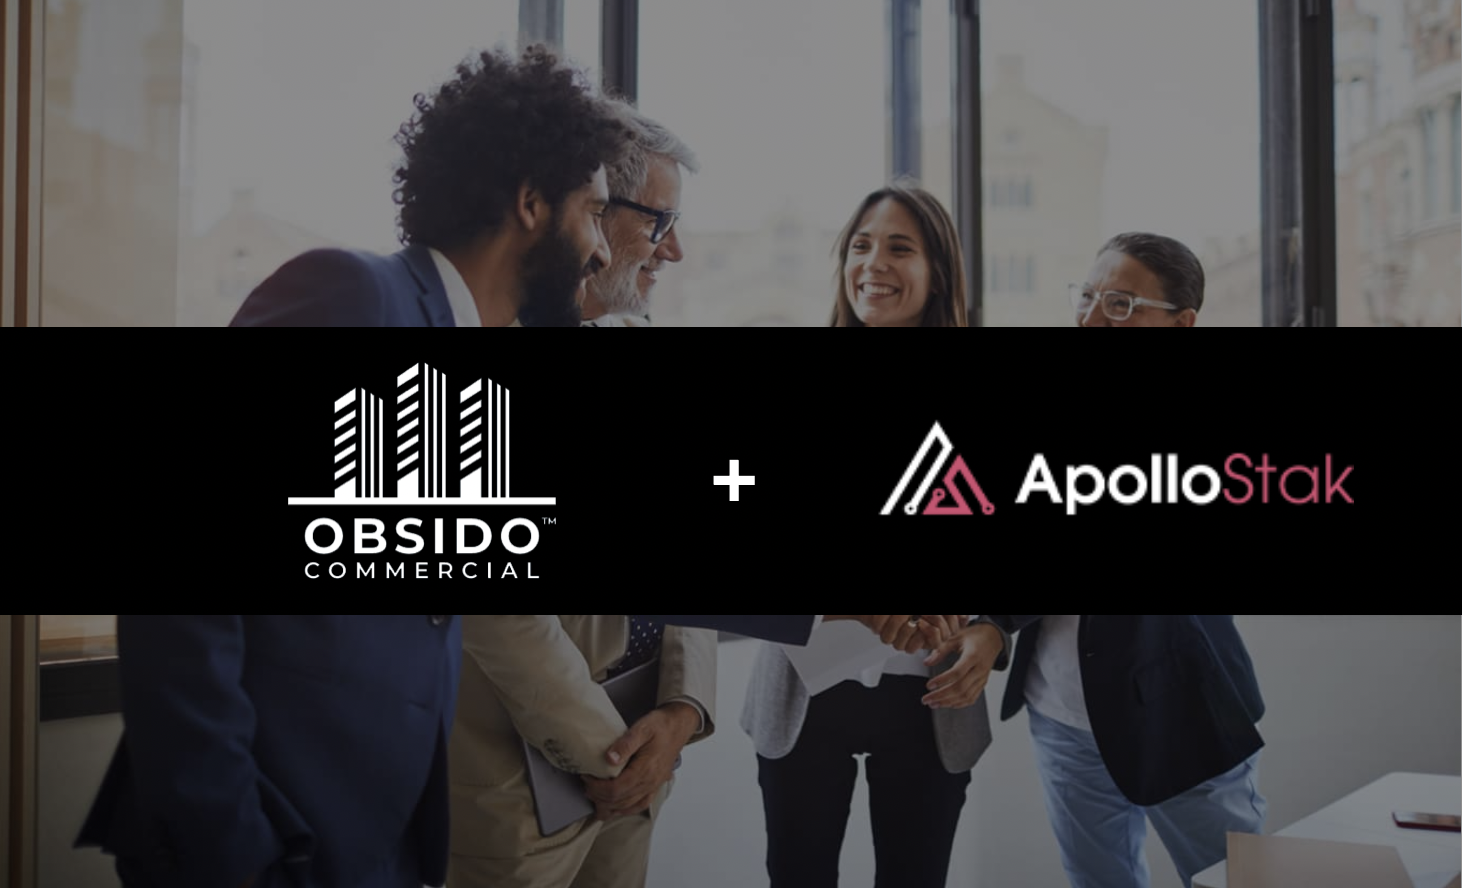 Obsido Commercial Acquires ApolloStak